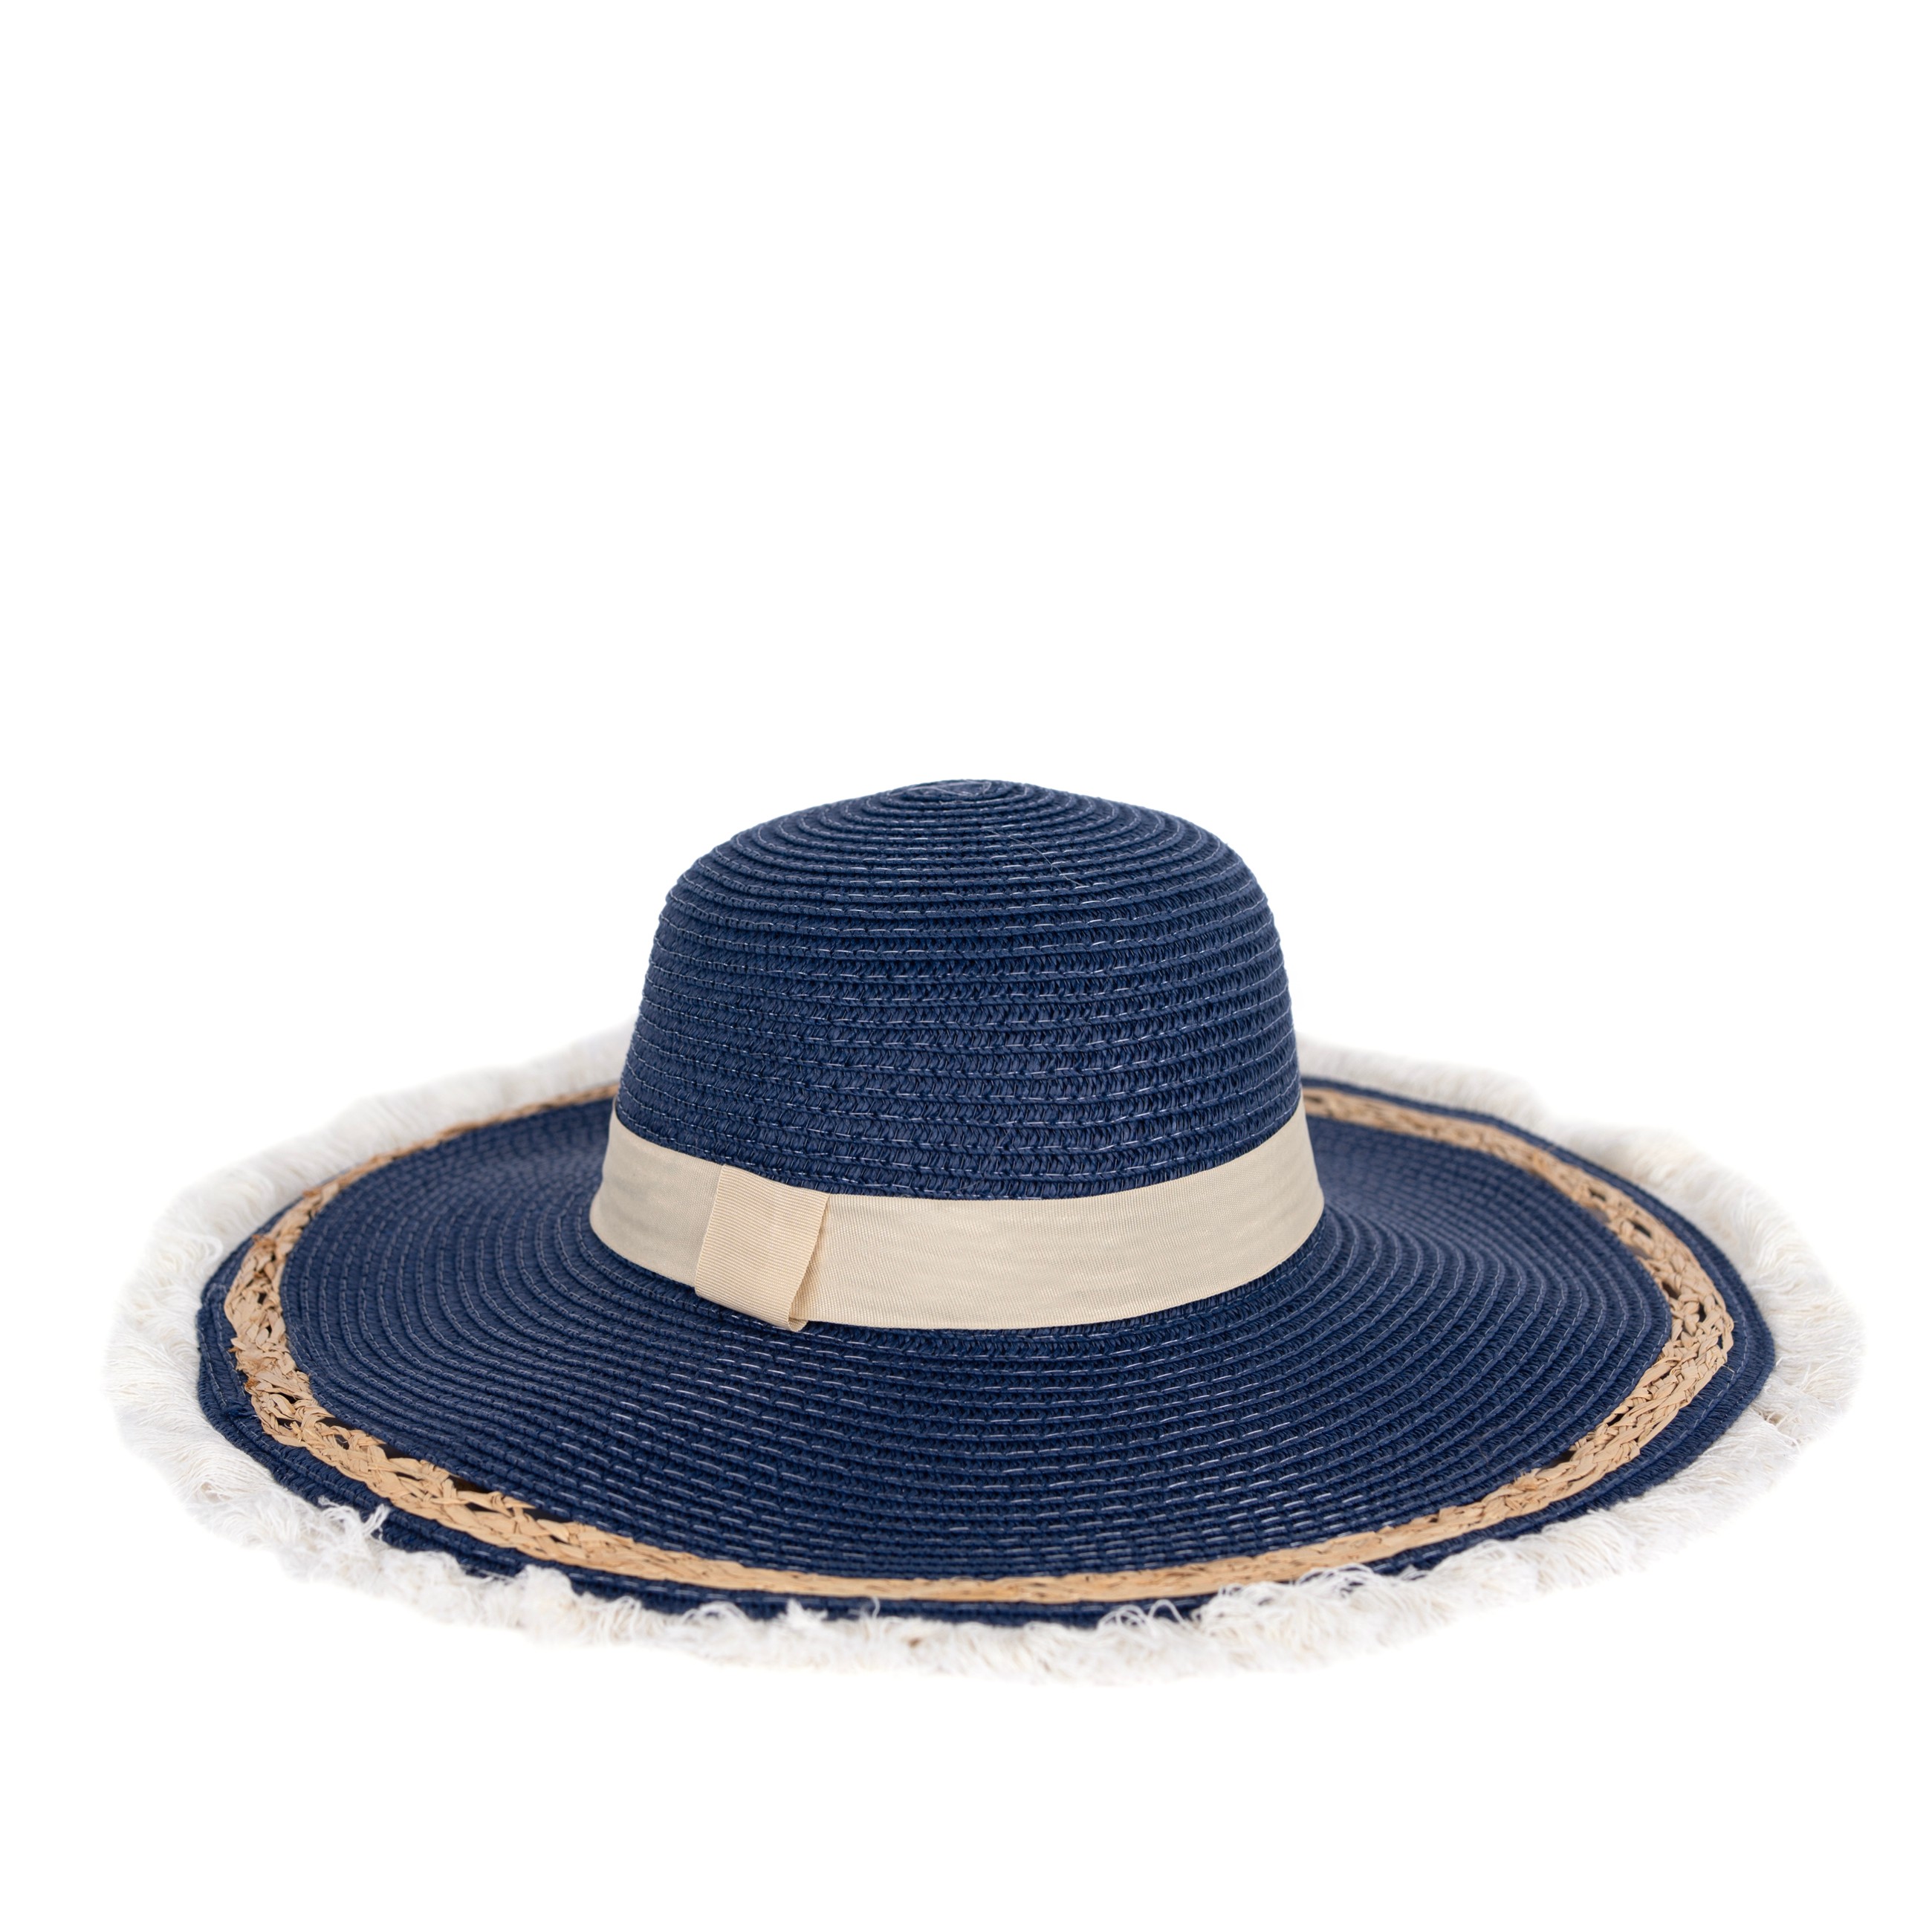 Art Of Polo Woman's Hat cz23109-2 Navy Blue